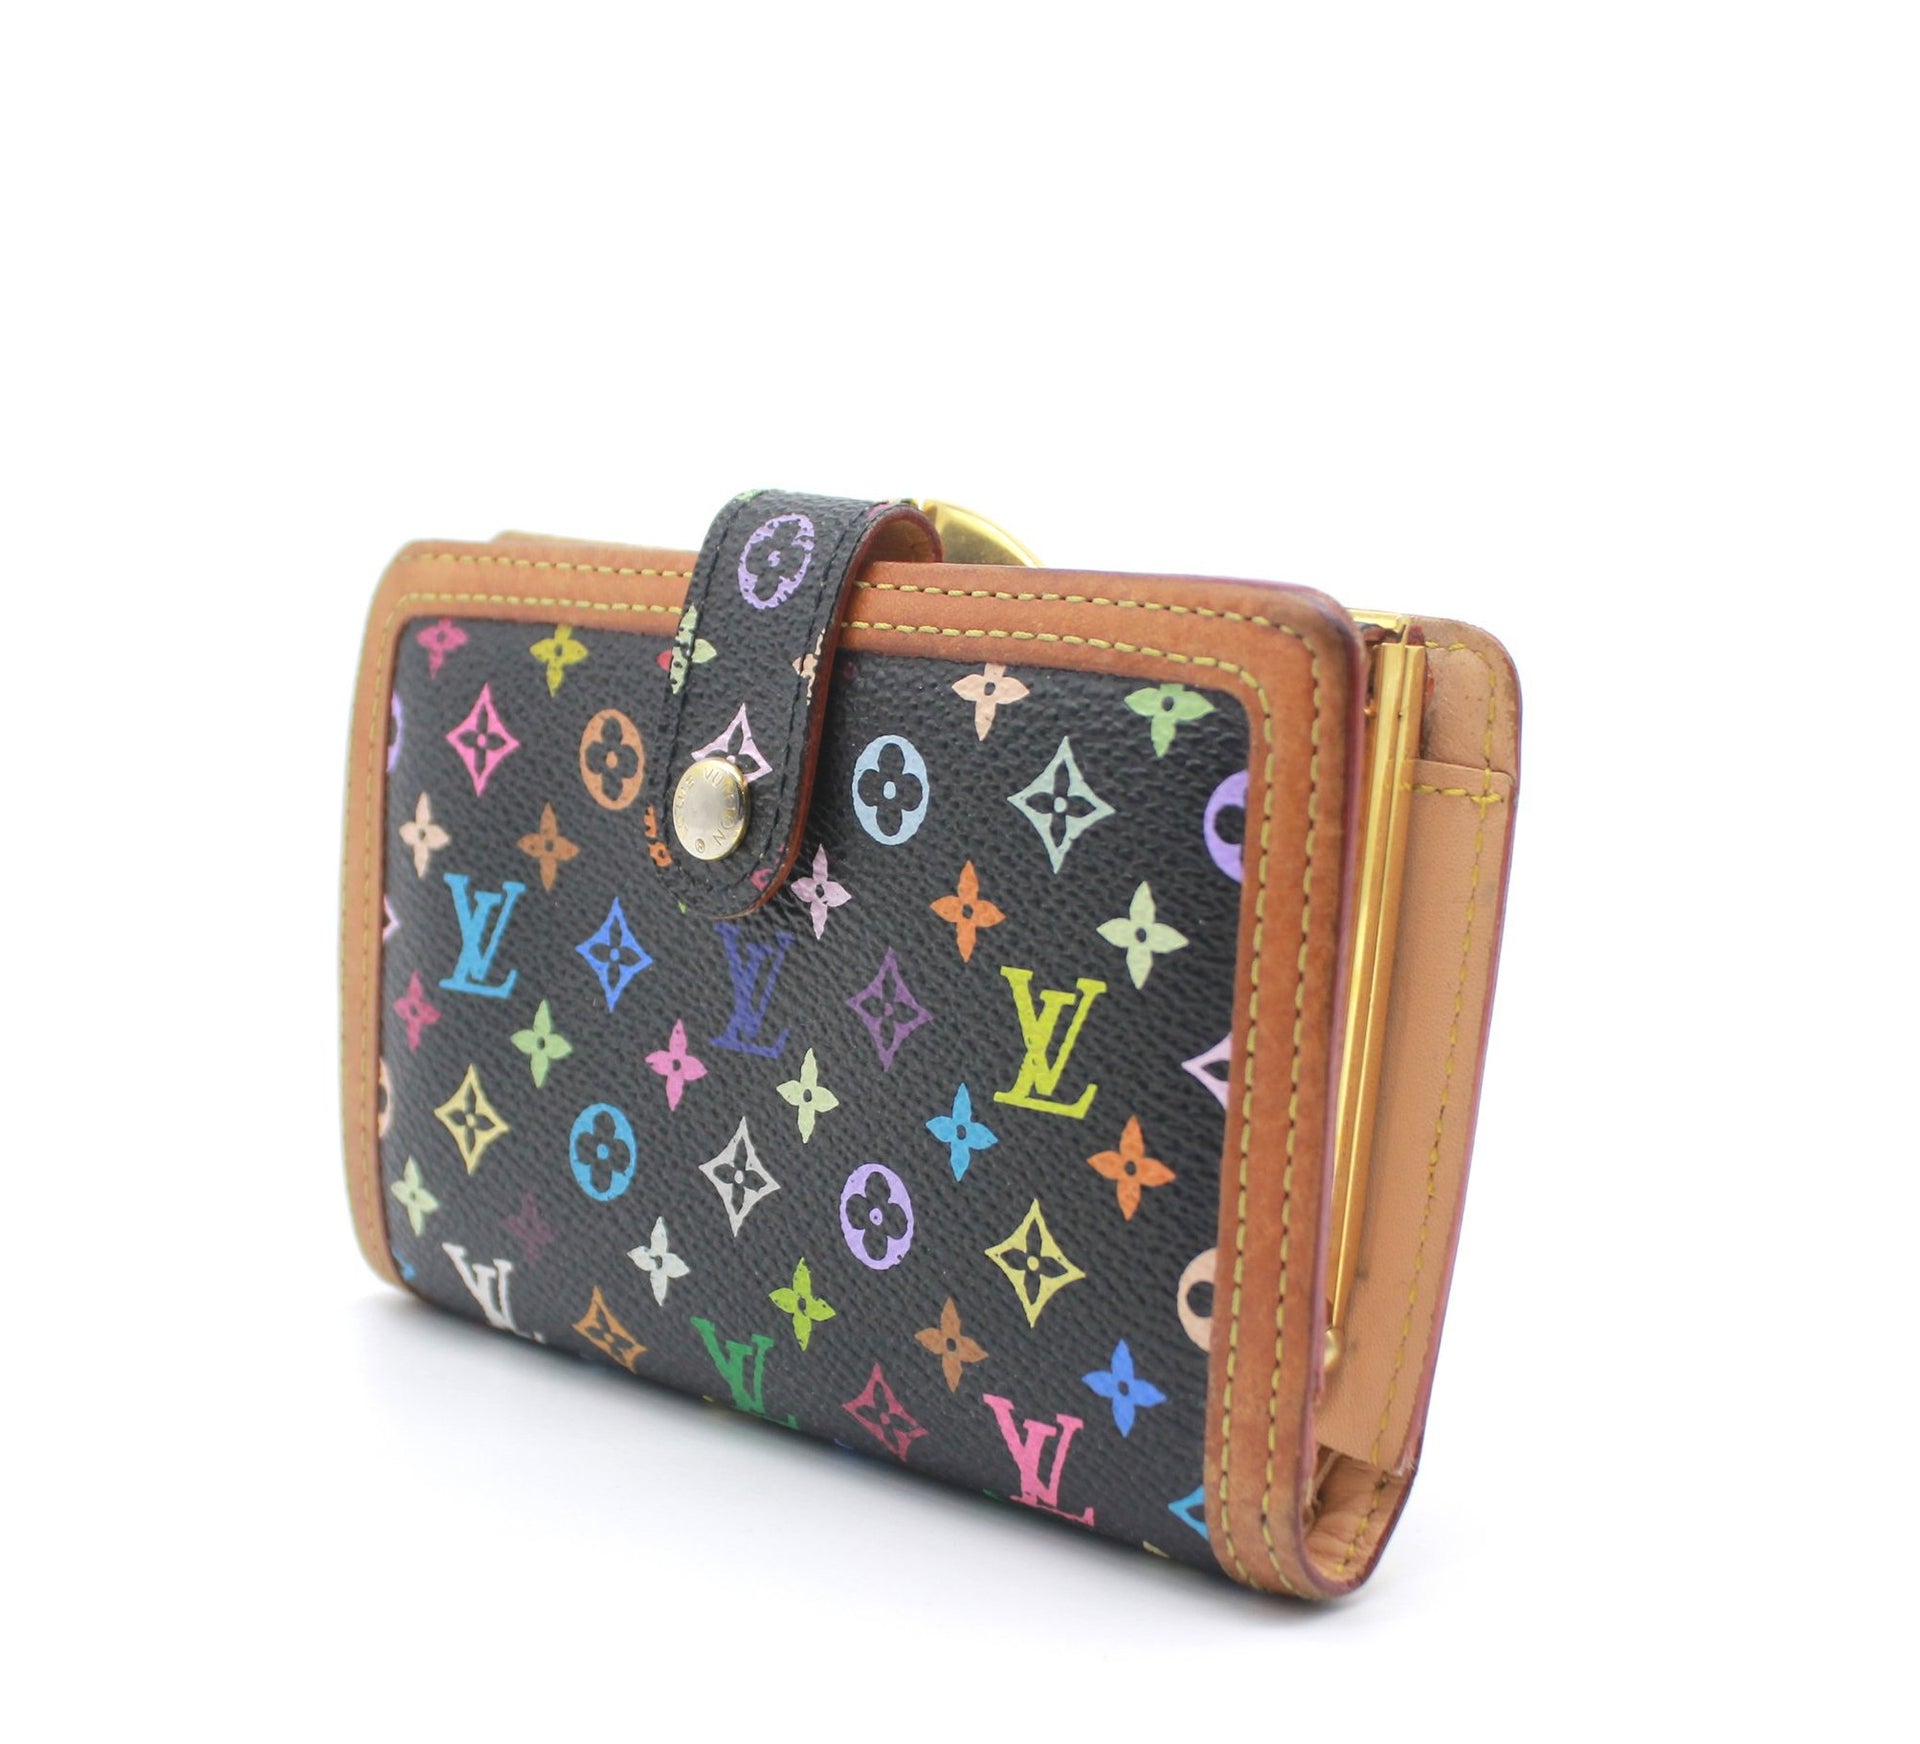 Zippy Wallet Monogram Empreinte Leather  Wallets and Small Leather Goods  LOUIS  VUITTON